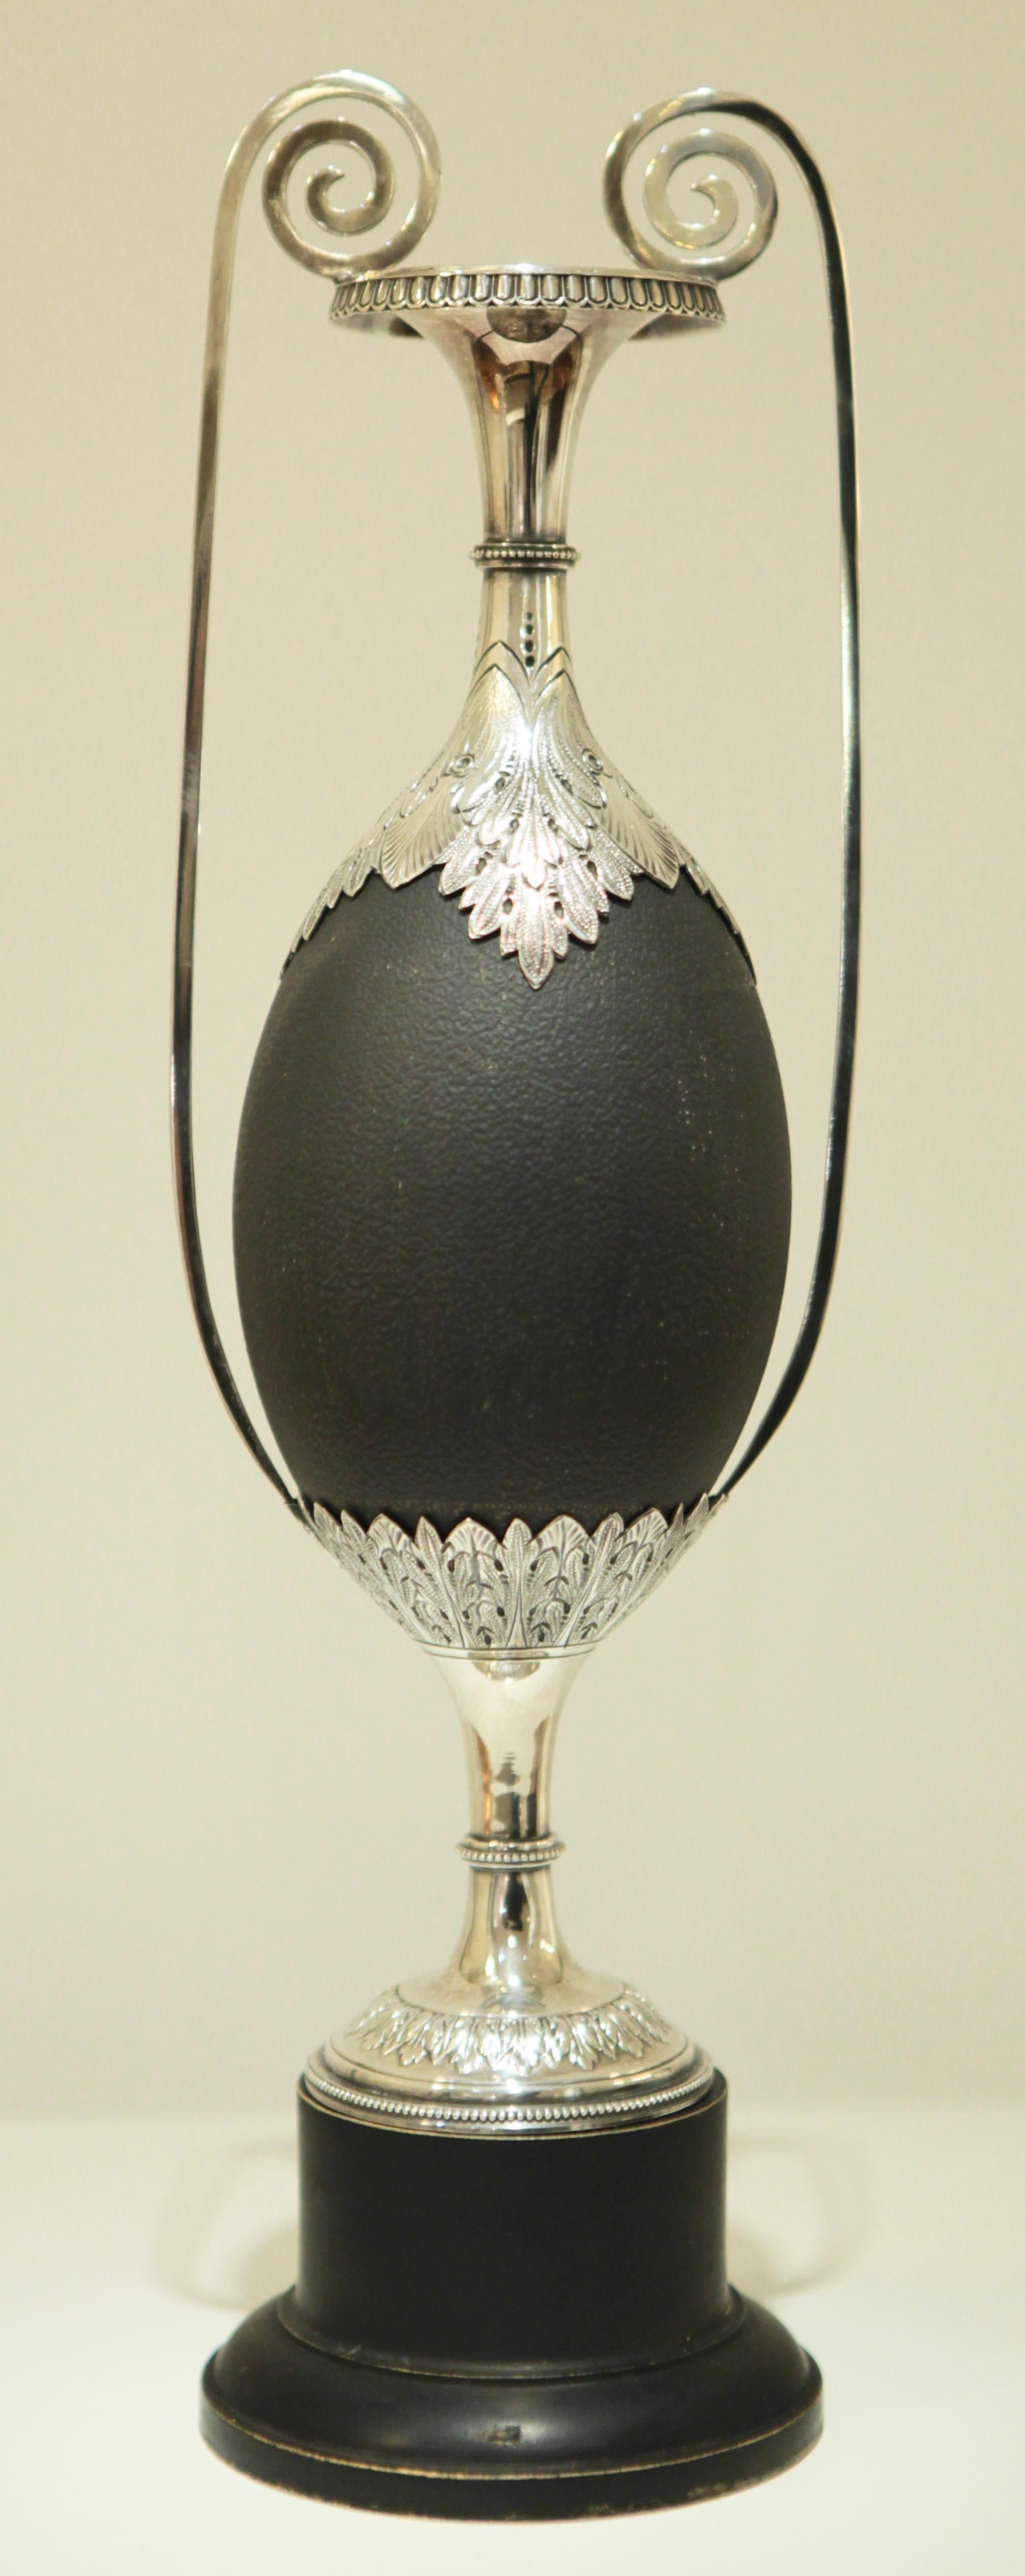 Art Nouveau silver mounted Australian Emu egg on a black wooden base,
Manufactured, circa 1900 in Adelaide, South Australia
Very fine Silver work, attributed to Henry Steiner
Unsigned.